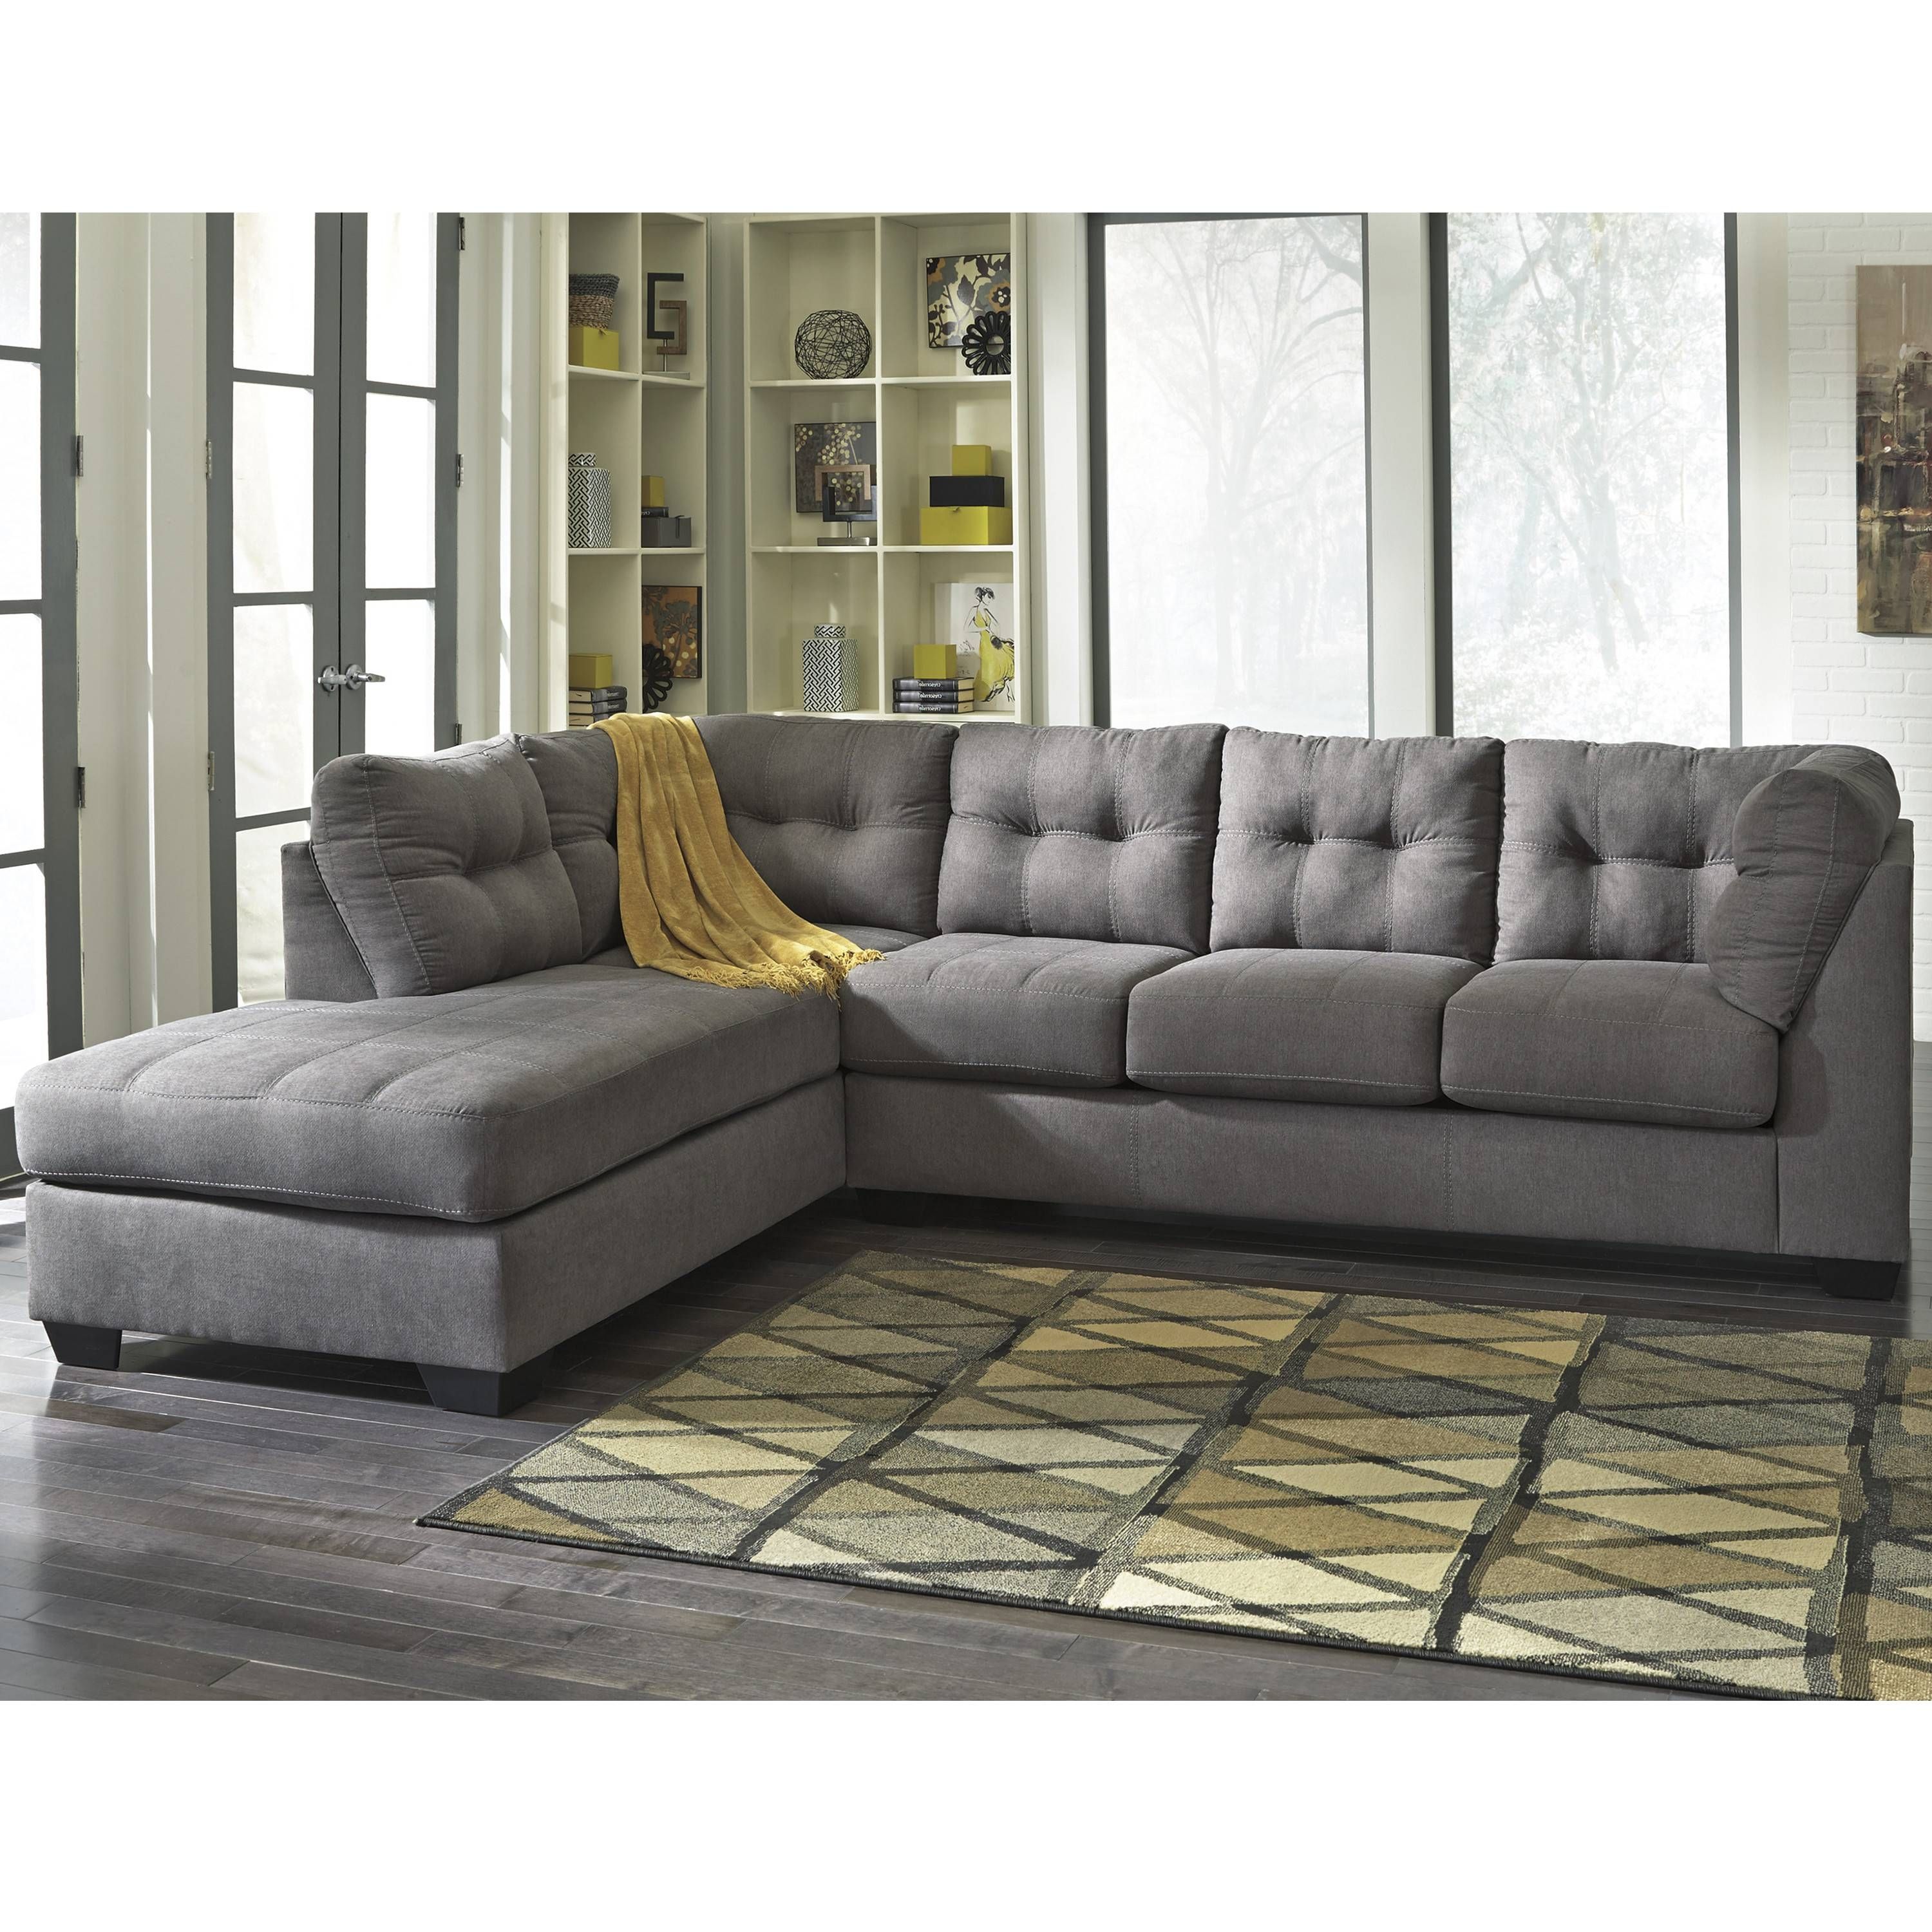 Living Room: Exciting Denim Sectional Sofa Design For Living Room Intended For Red Microfiber Sectional Sofas (View 30 of 30)